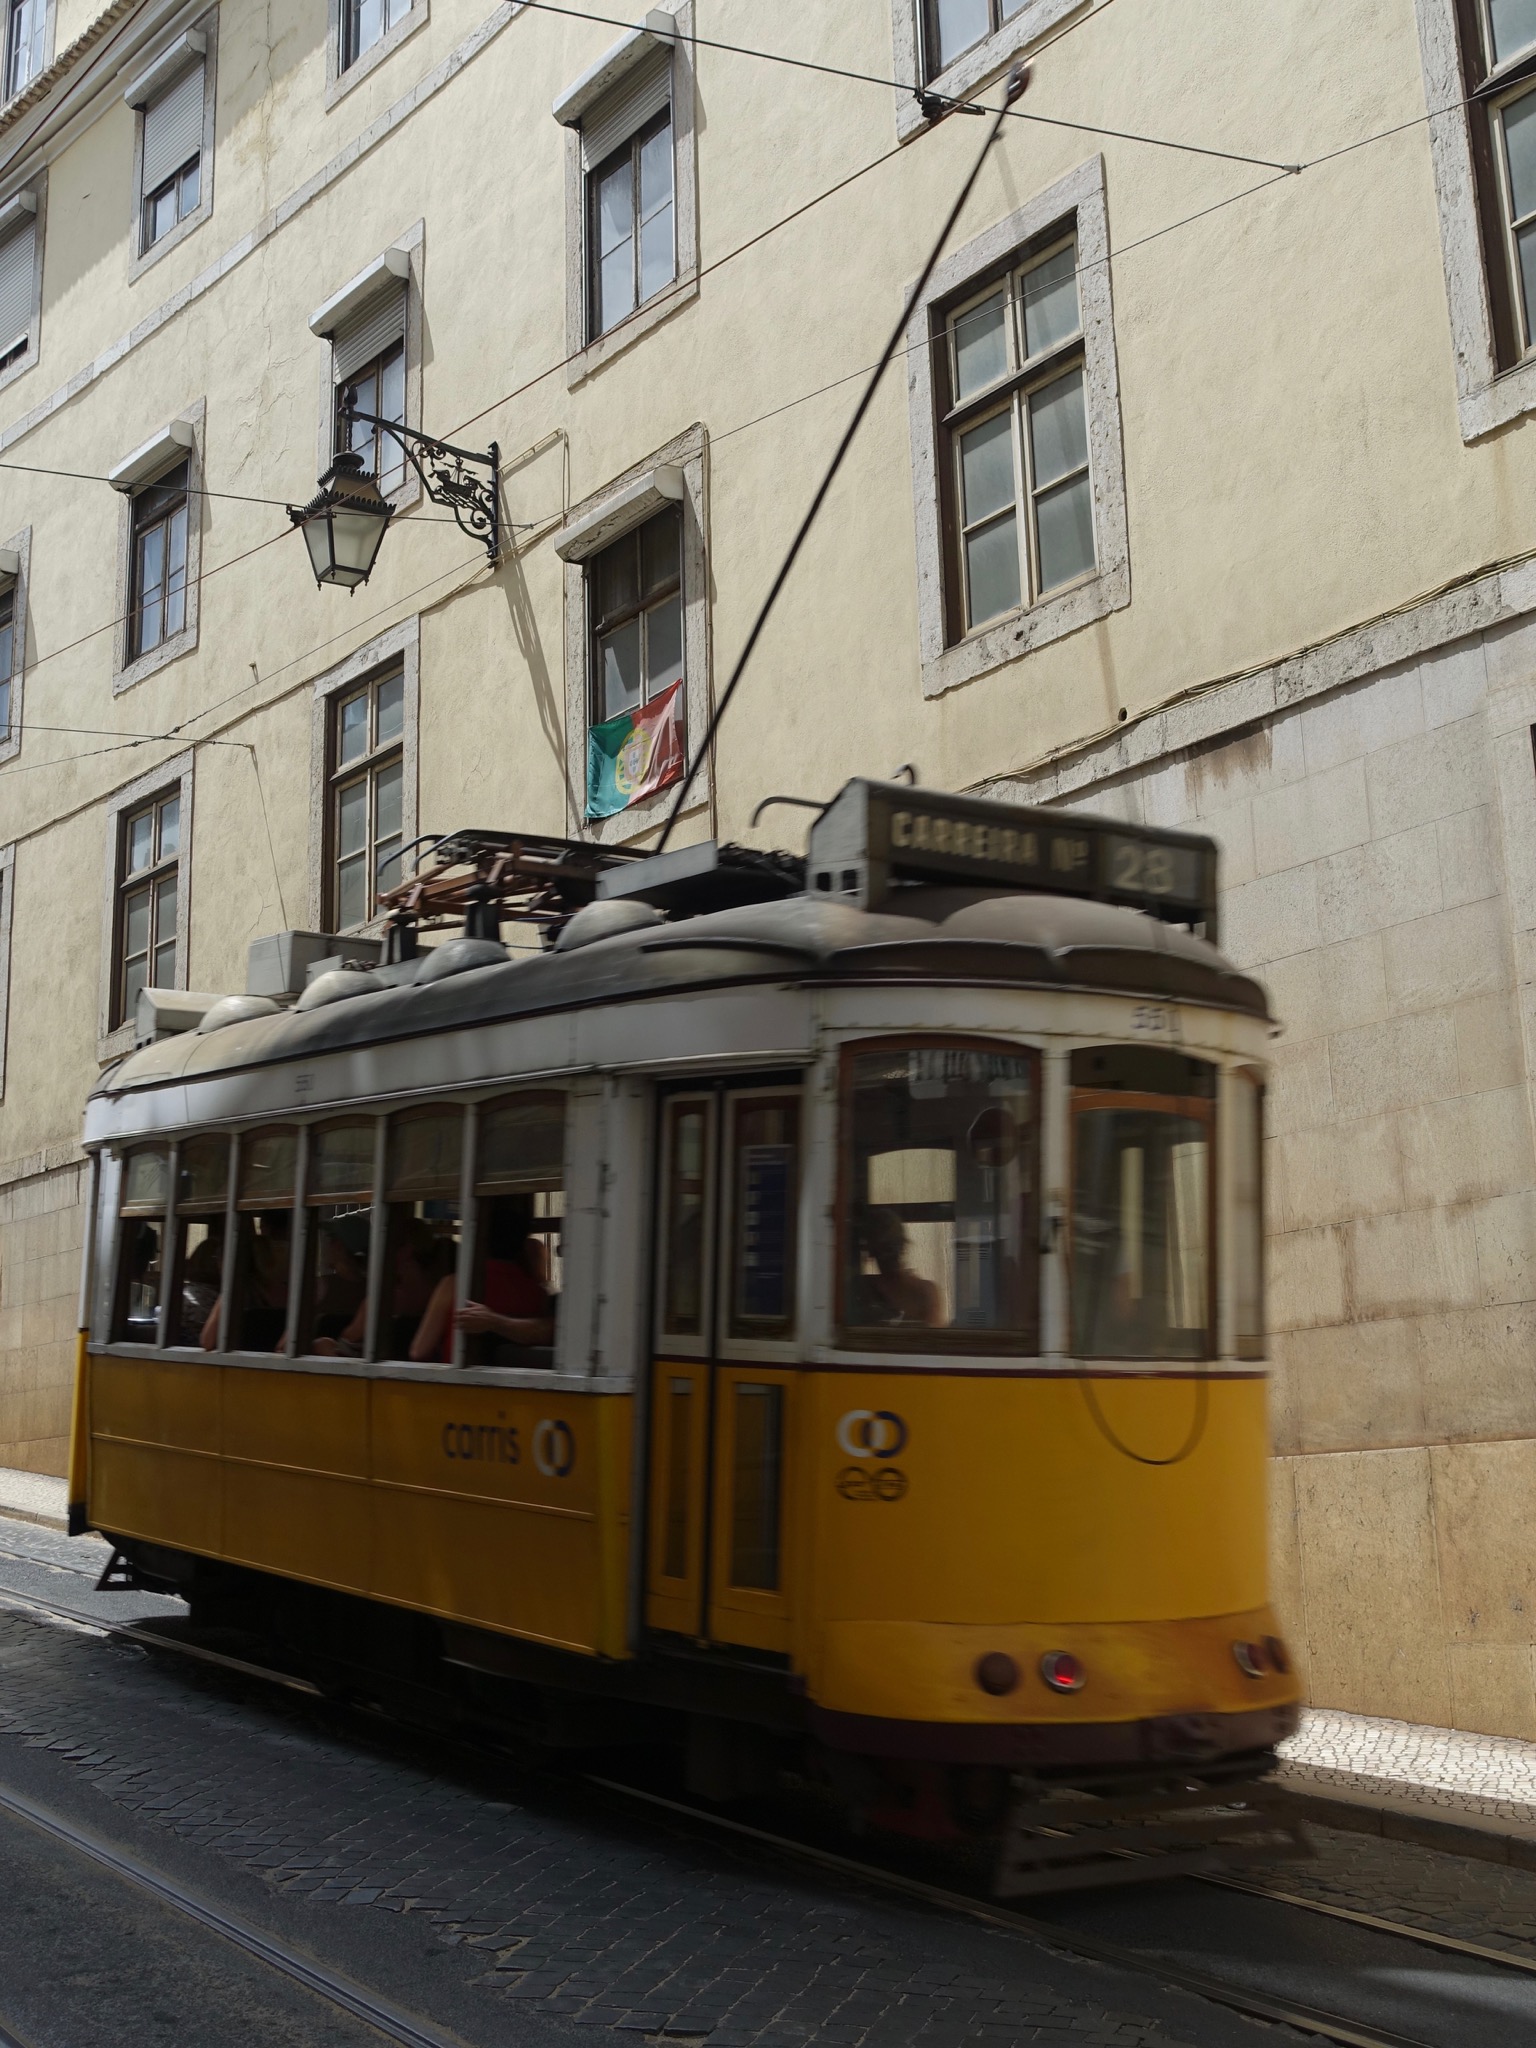 Photo 56 of 86 from the album Highlights Lisbon 2015.